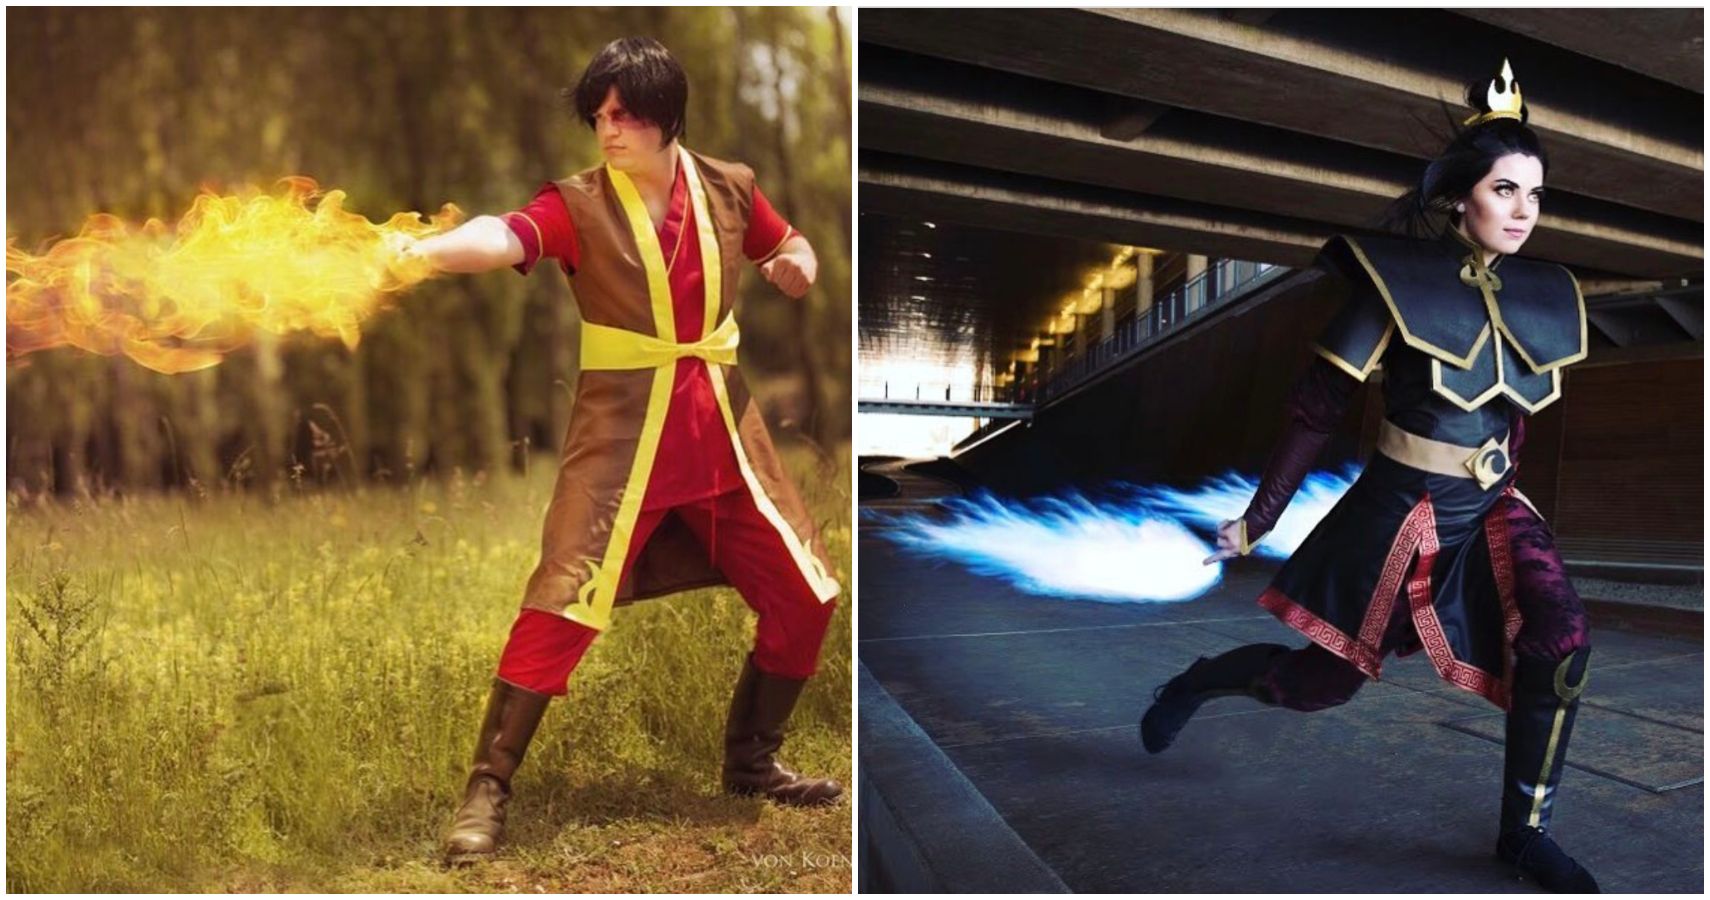 10 Outstanding Firebender Cosplays From Avatar The Last Airbender.